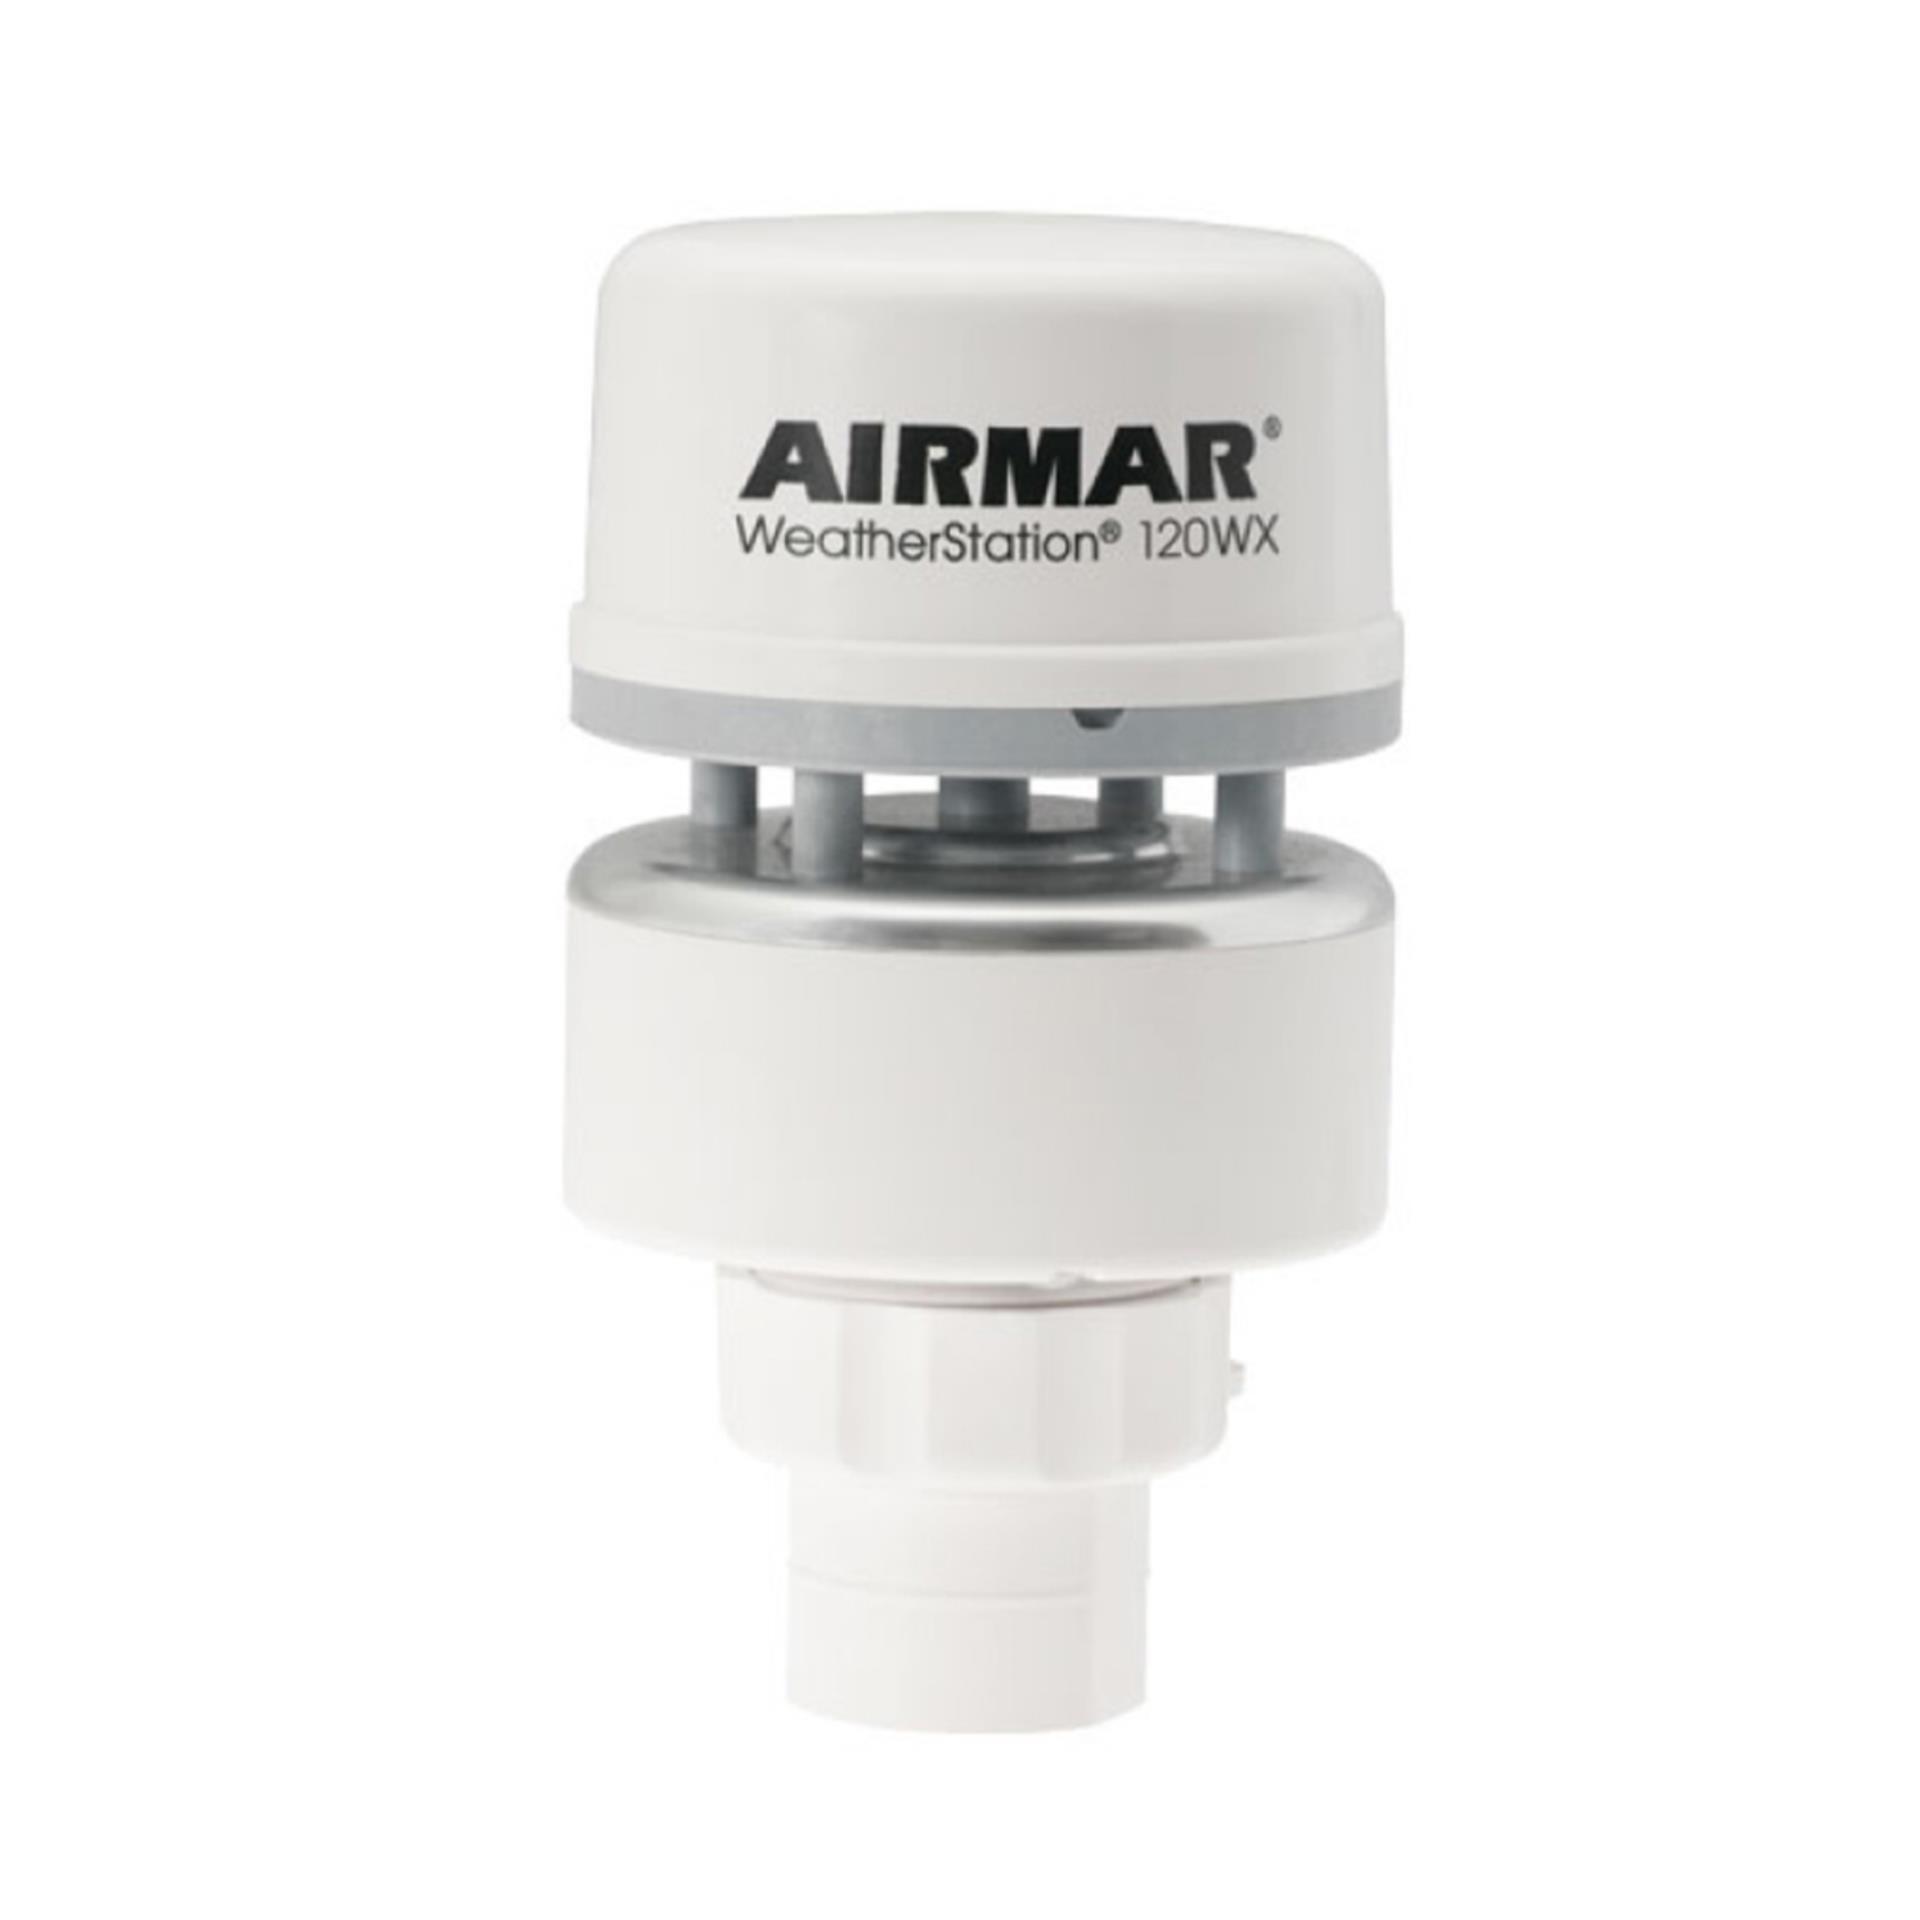 Airmar 120WX Weather Station Ultraschall